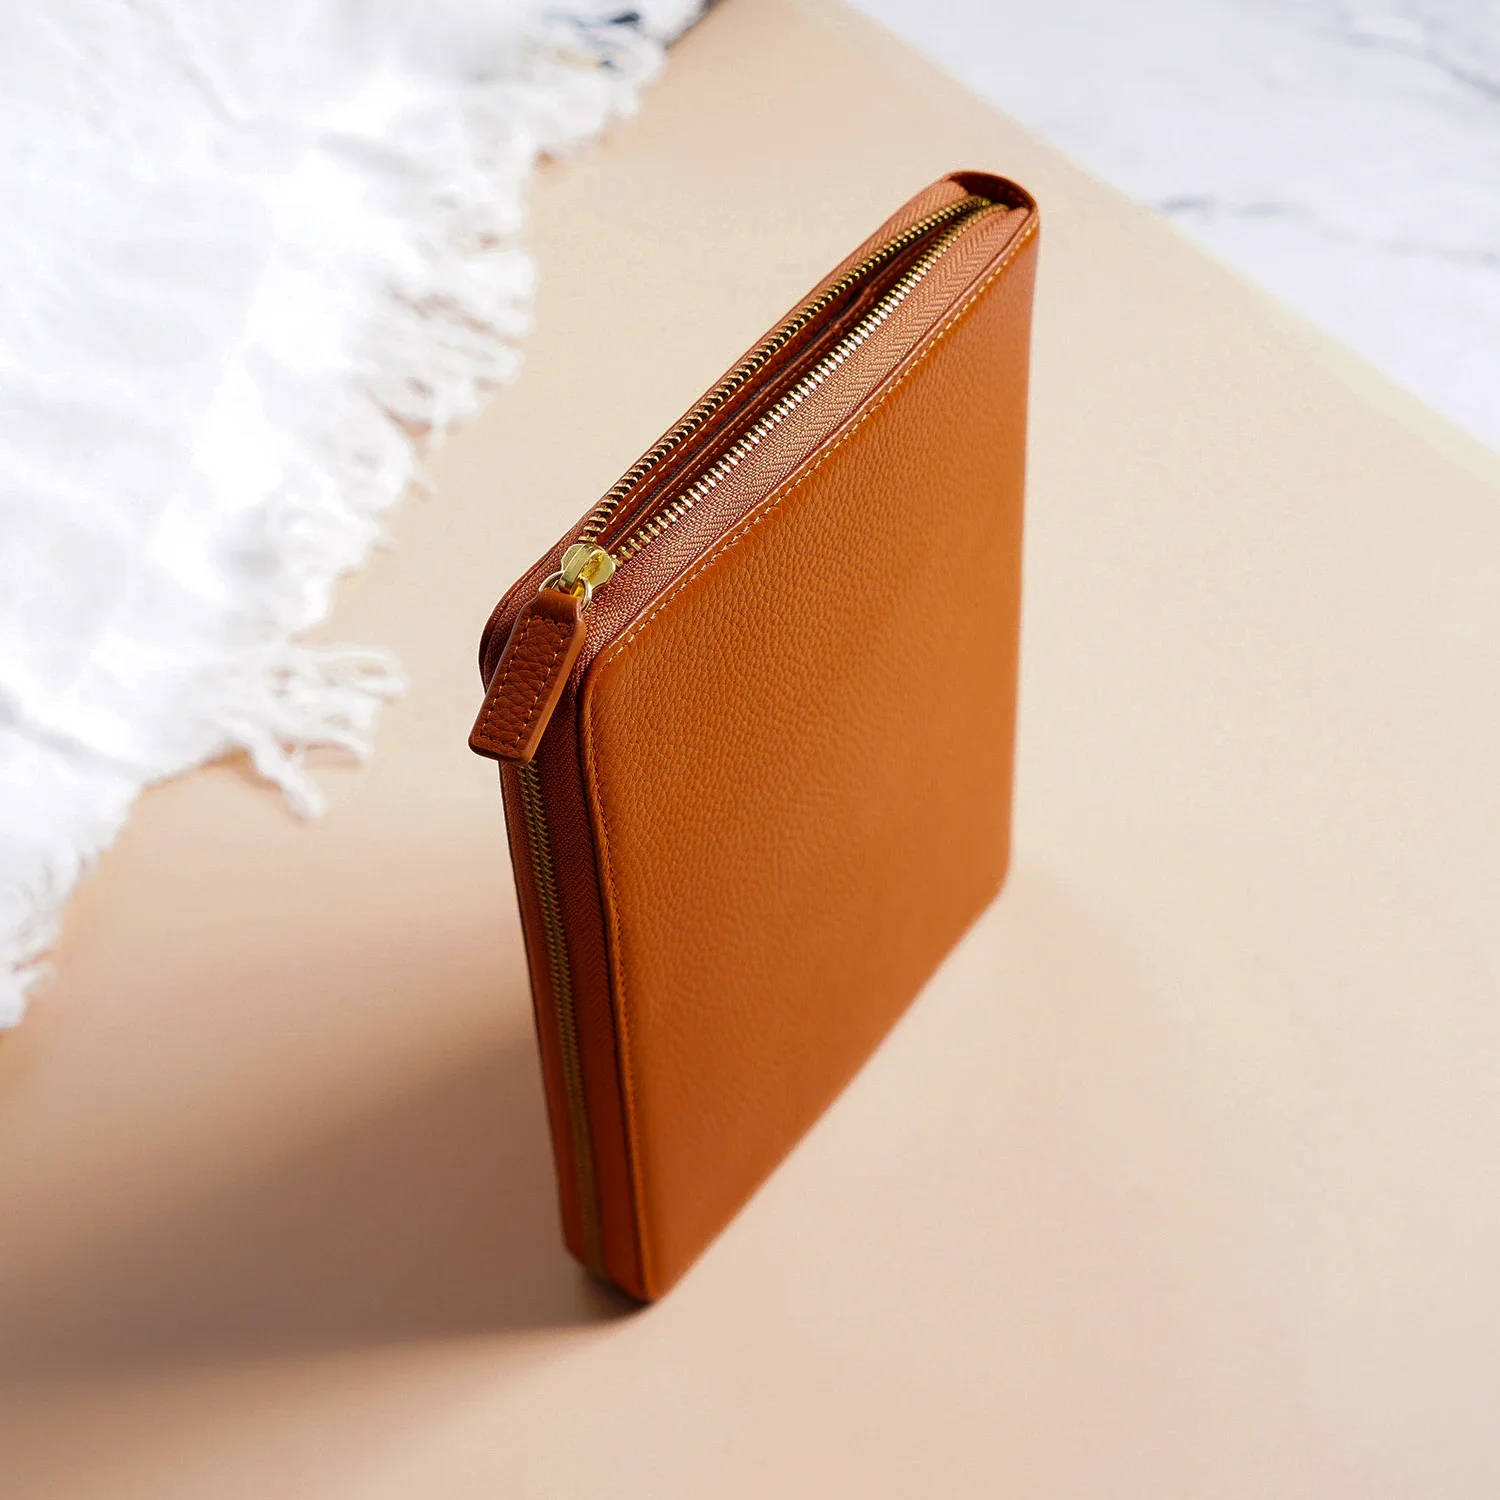 Limited Imperfect Moterm Genuine Pebbled Grain Leather A5 Zip Cover With  Top Pocket Cowhide Planner Zipper Notebook Organizer - Notebook - AliExpress